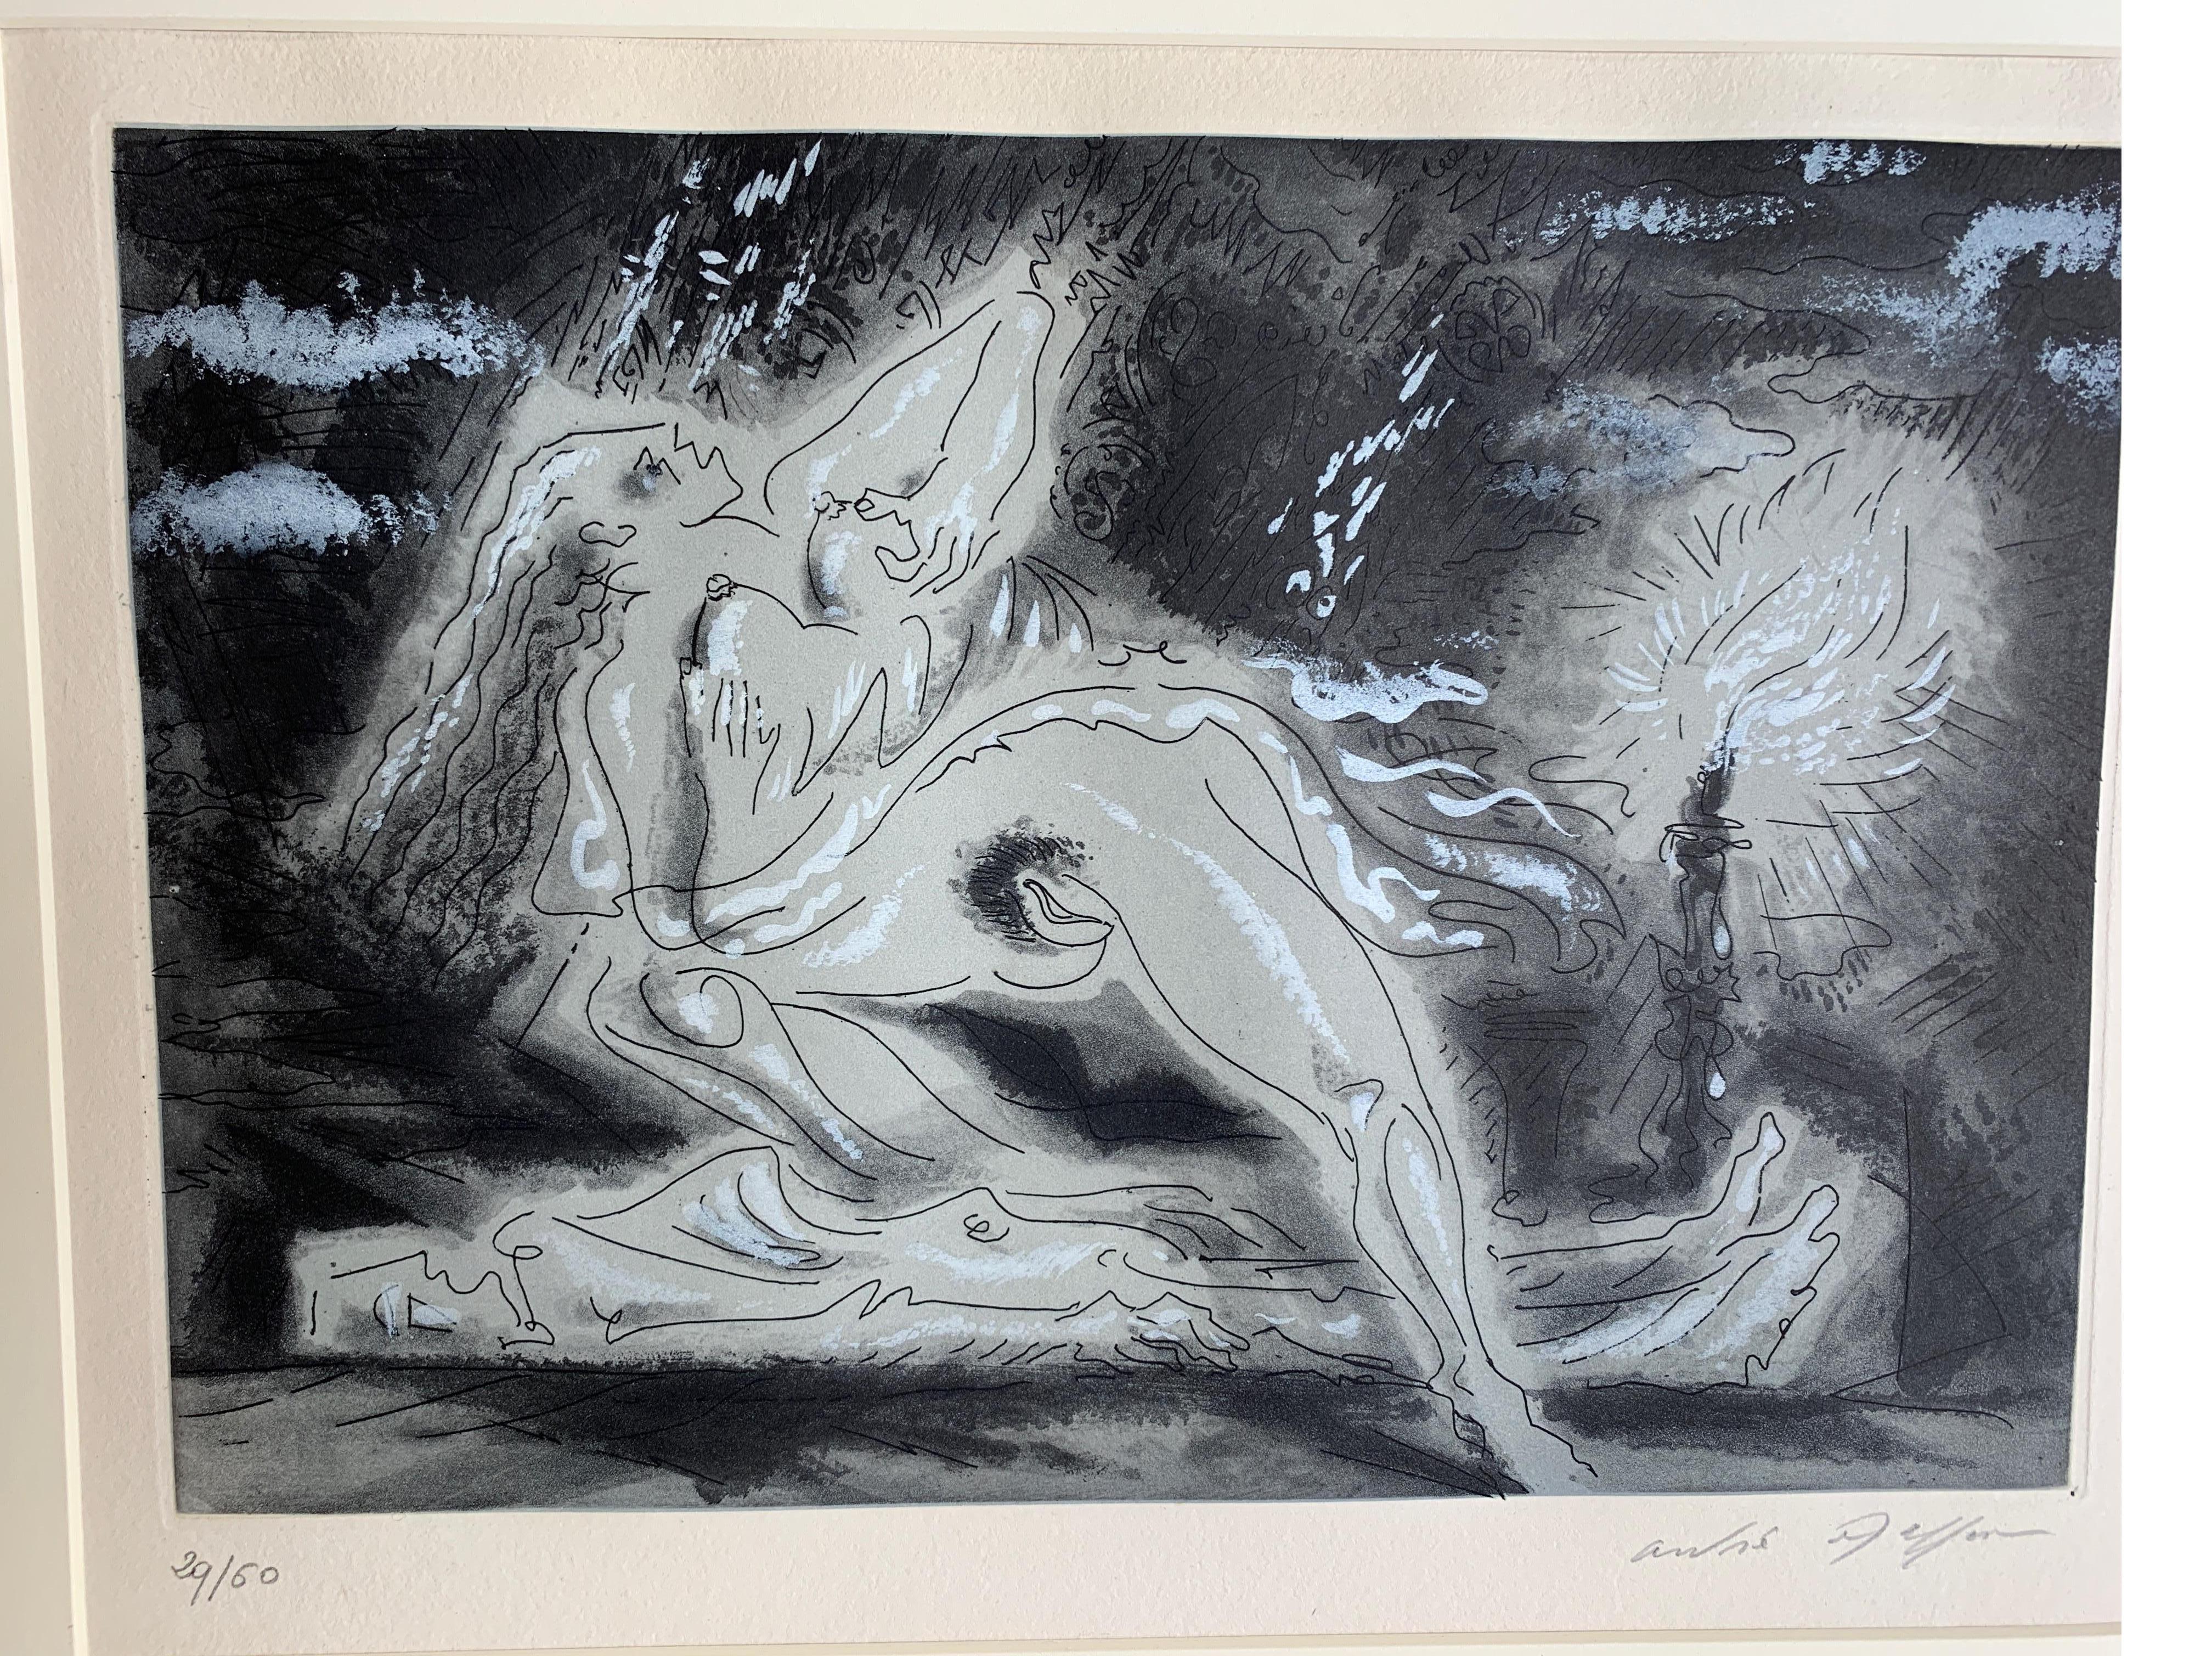 Series of Nine Surrealist Erotic Lithographs by Andre Masson, Signed / Numbered 7